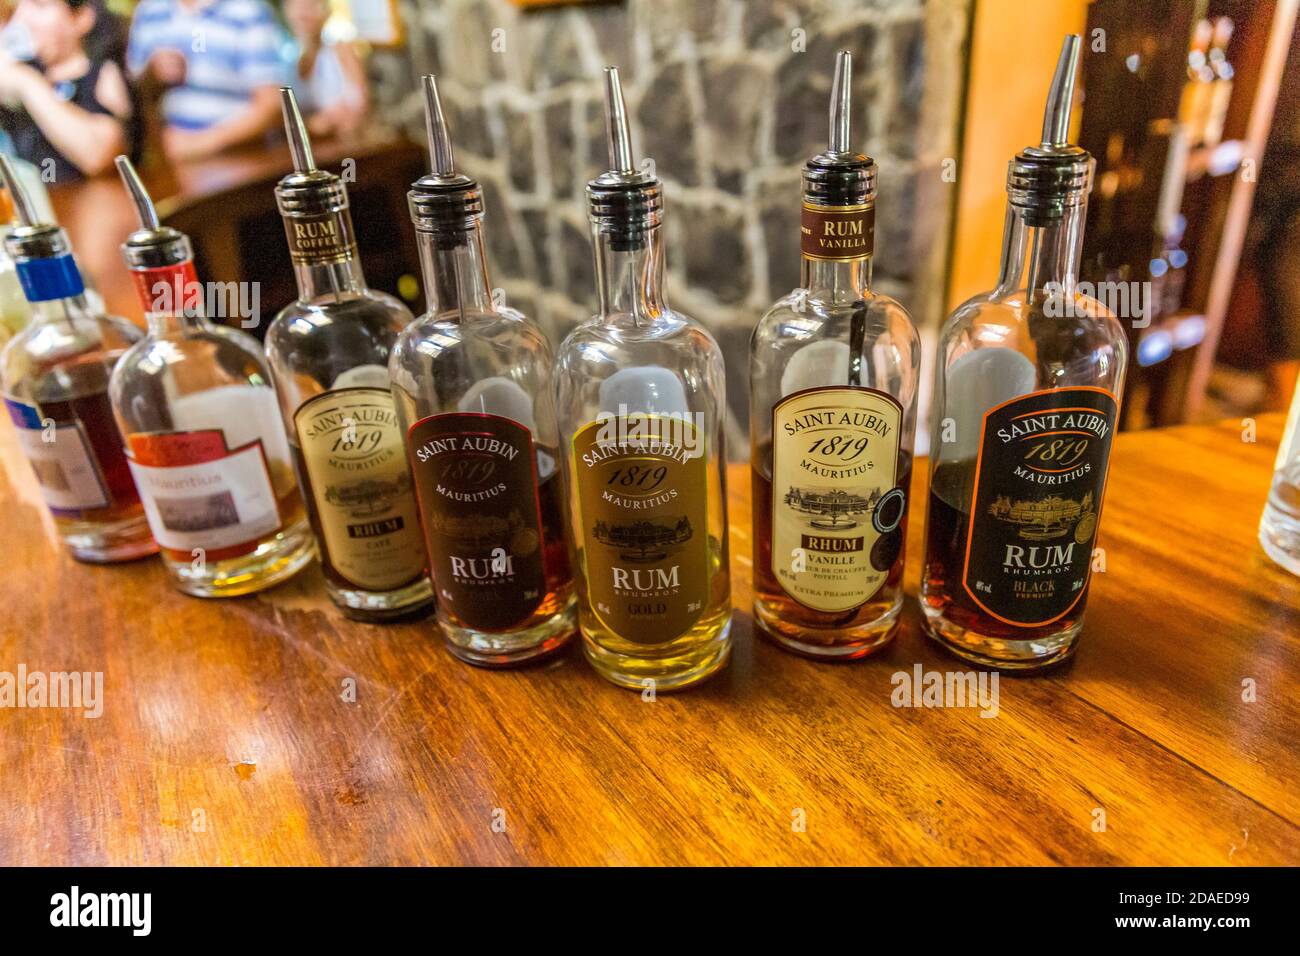 Different types of rum, rum distillery Le Saint Aubin, founded in 1819, colonial-style house, Saint Aubin, Mauritius, Africa, Indian Ocean Stock Photo